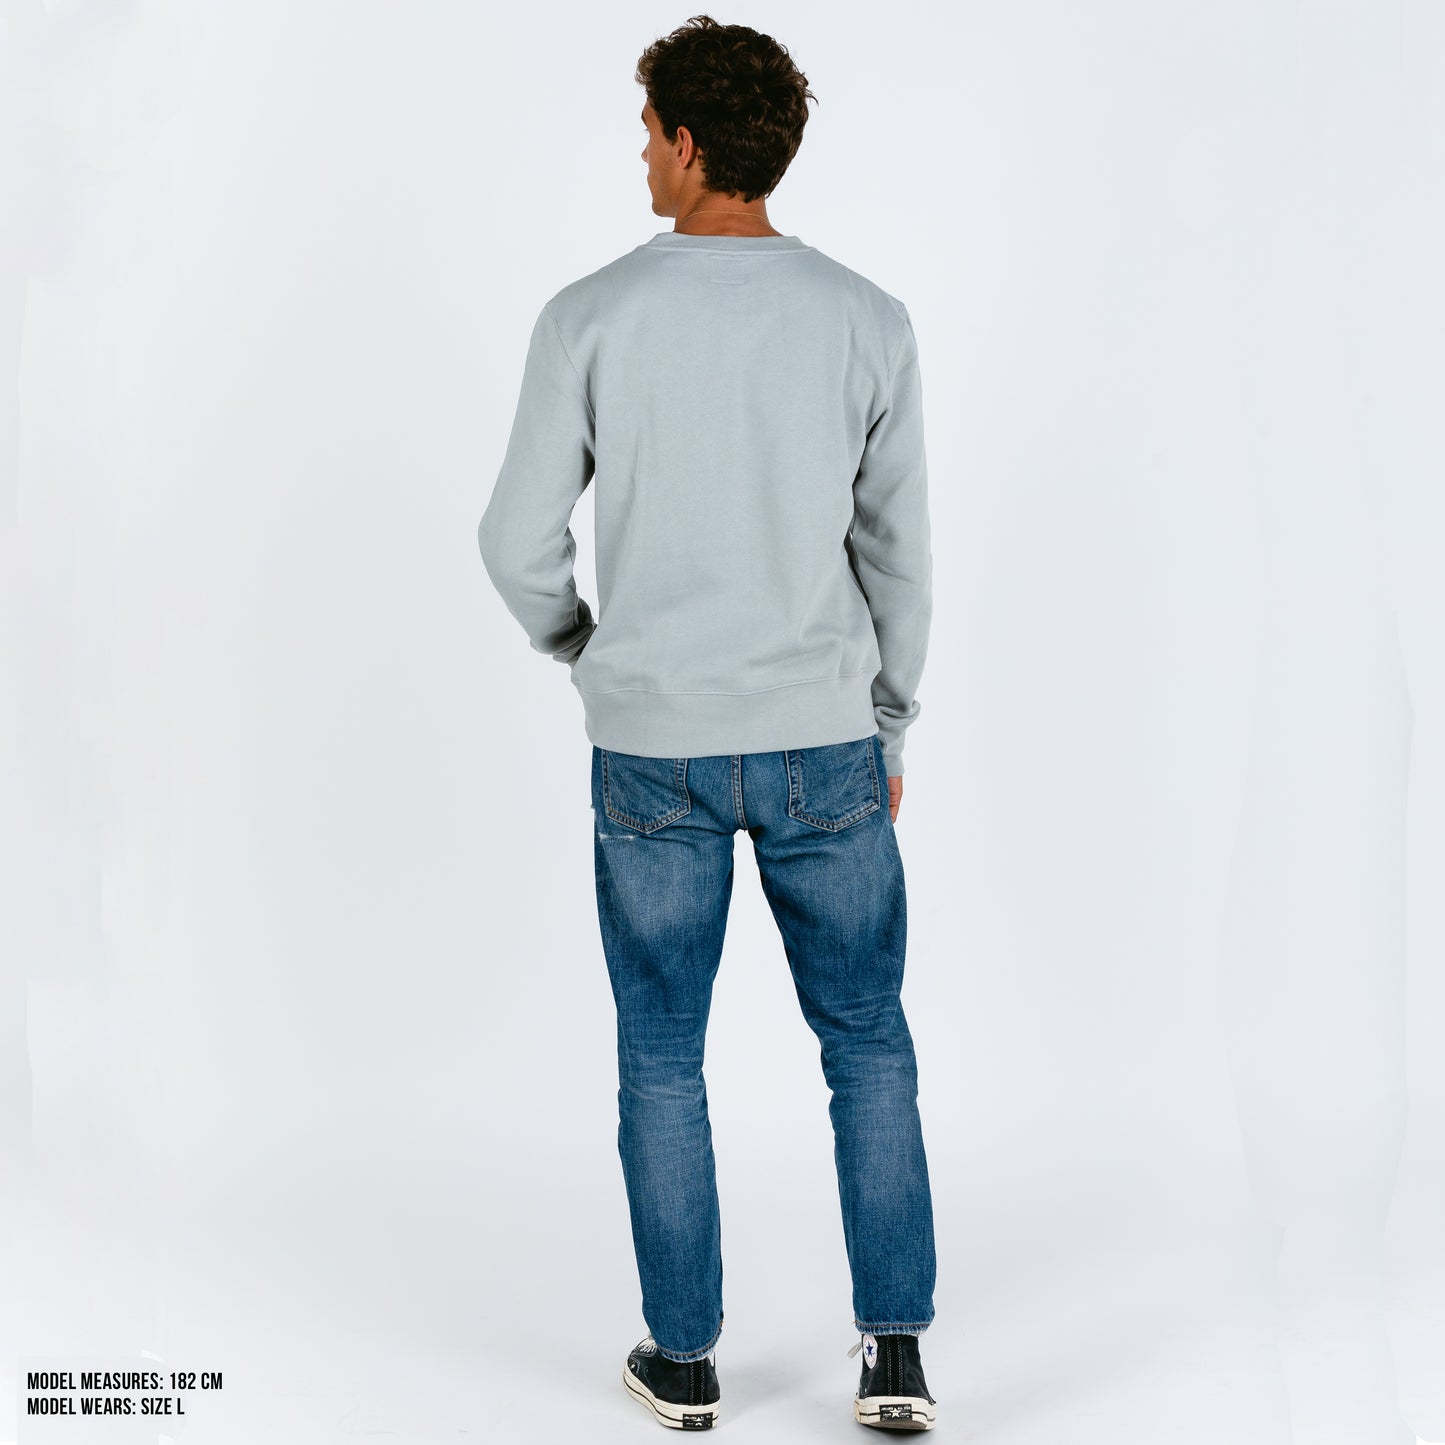 Light solid grey classic cut sweater with curl embroidery quote. I need a siesta. Cozy interior to keep you warm. Cuffs and waist with elastic rib. Designed in Spain. Sudadera gris. Sudadera oversized. Sudadera básica.